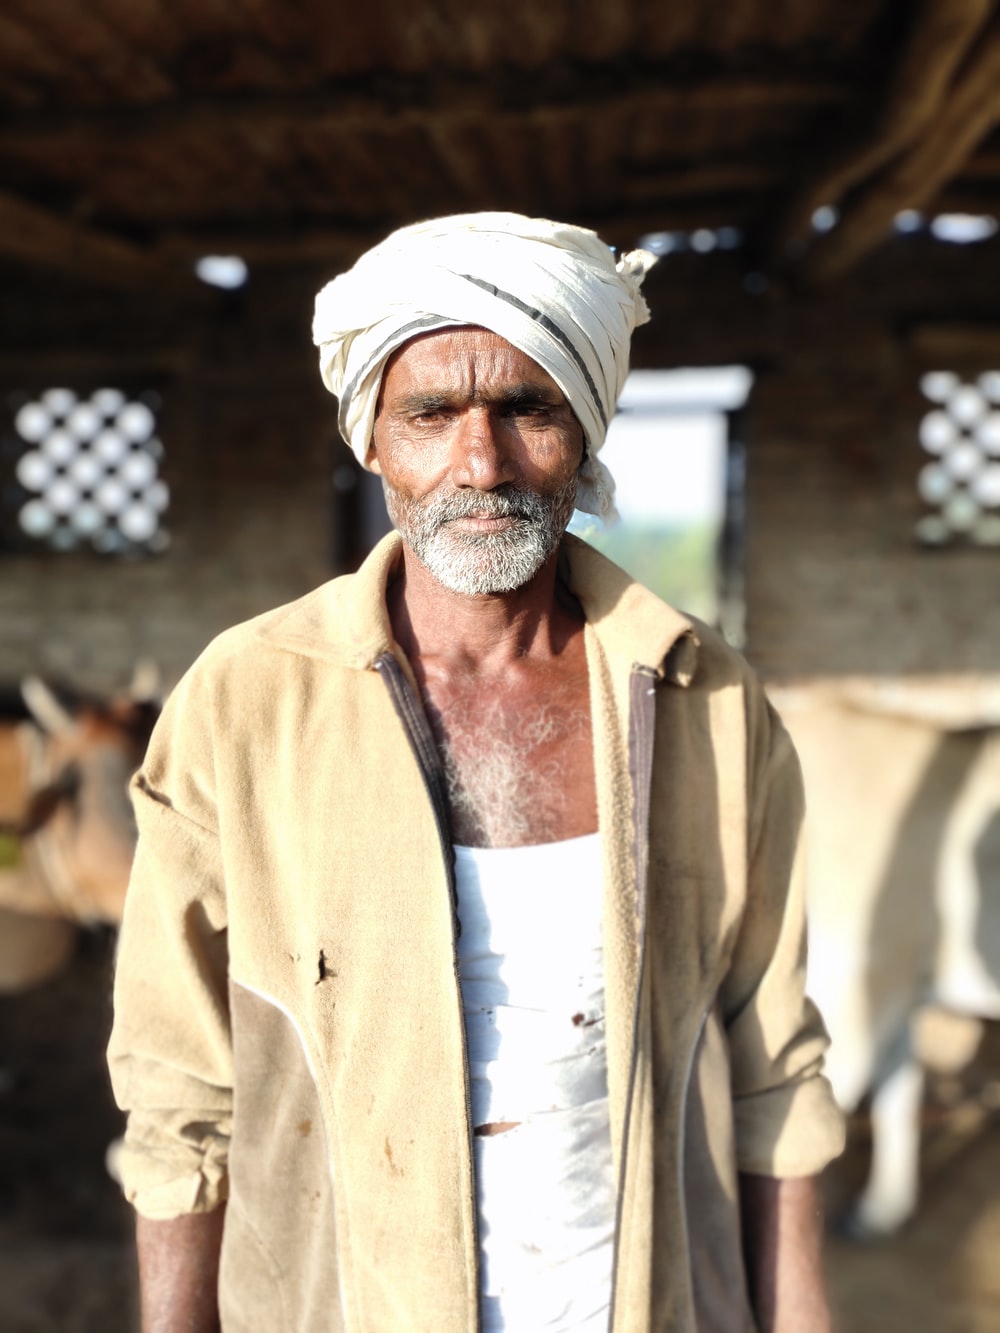 Annadata – The Farmers Deserve Empathy & Compassion from the Nation